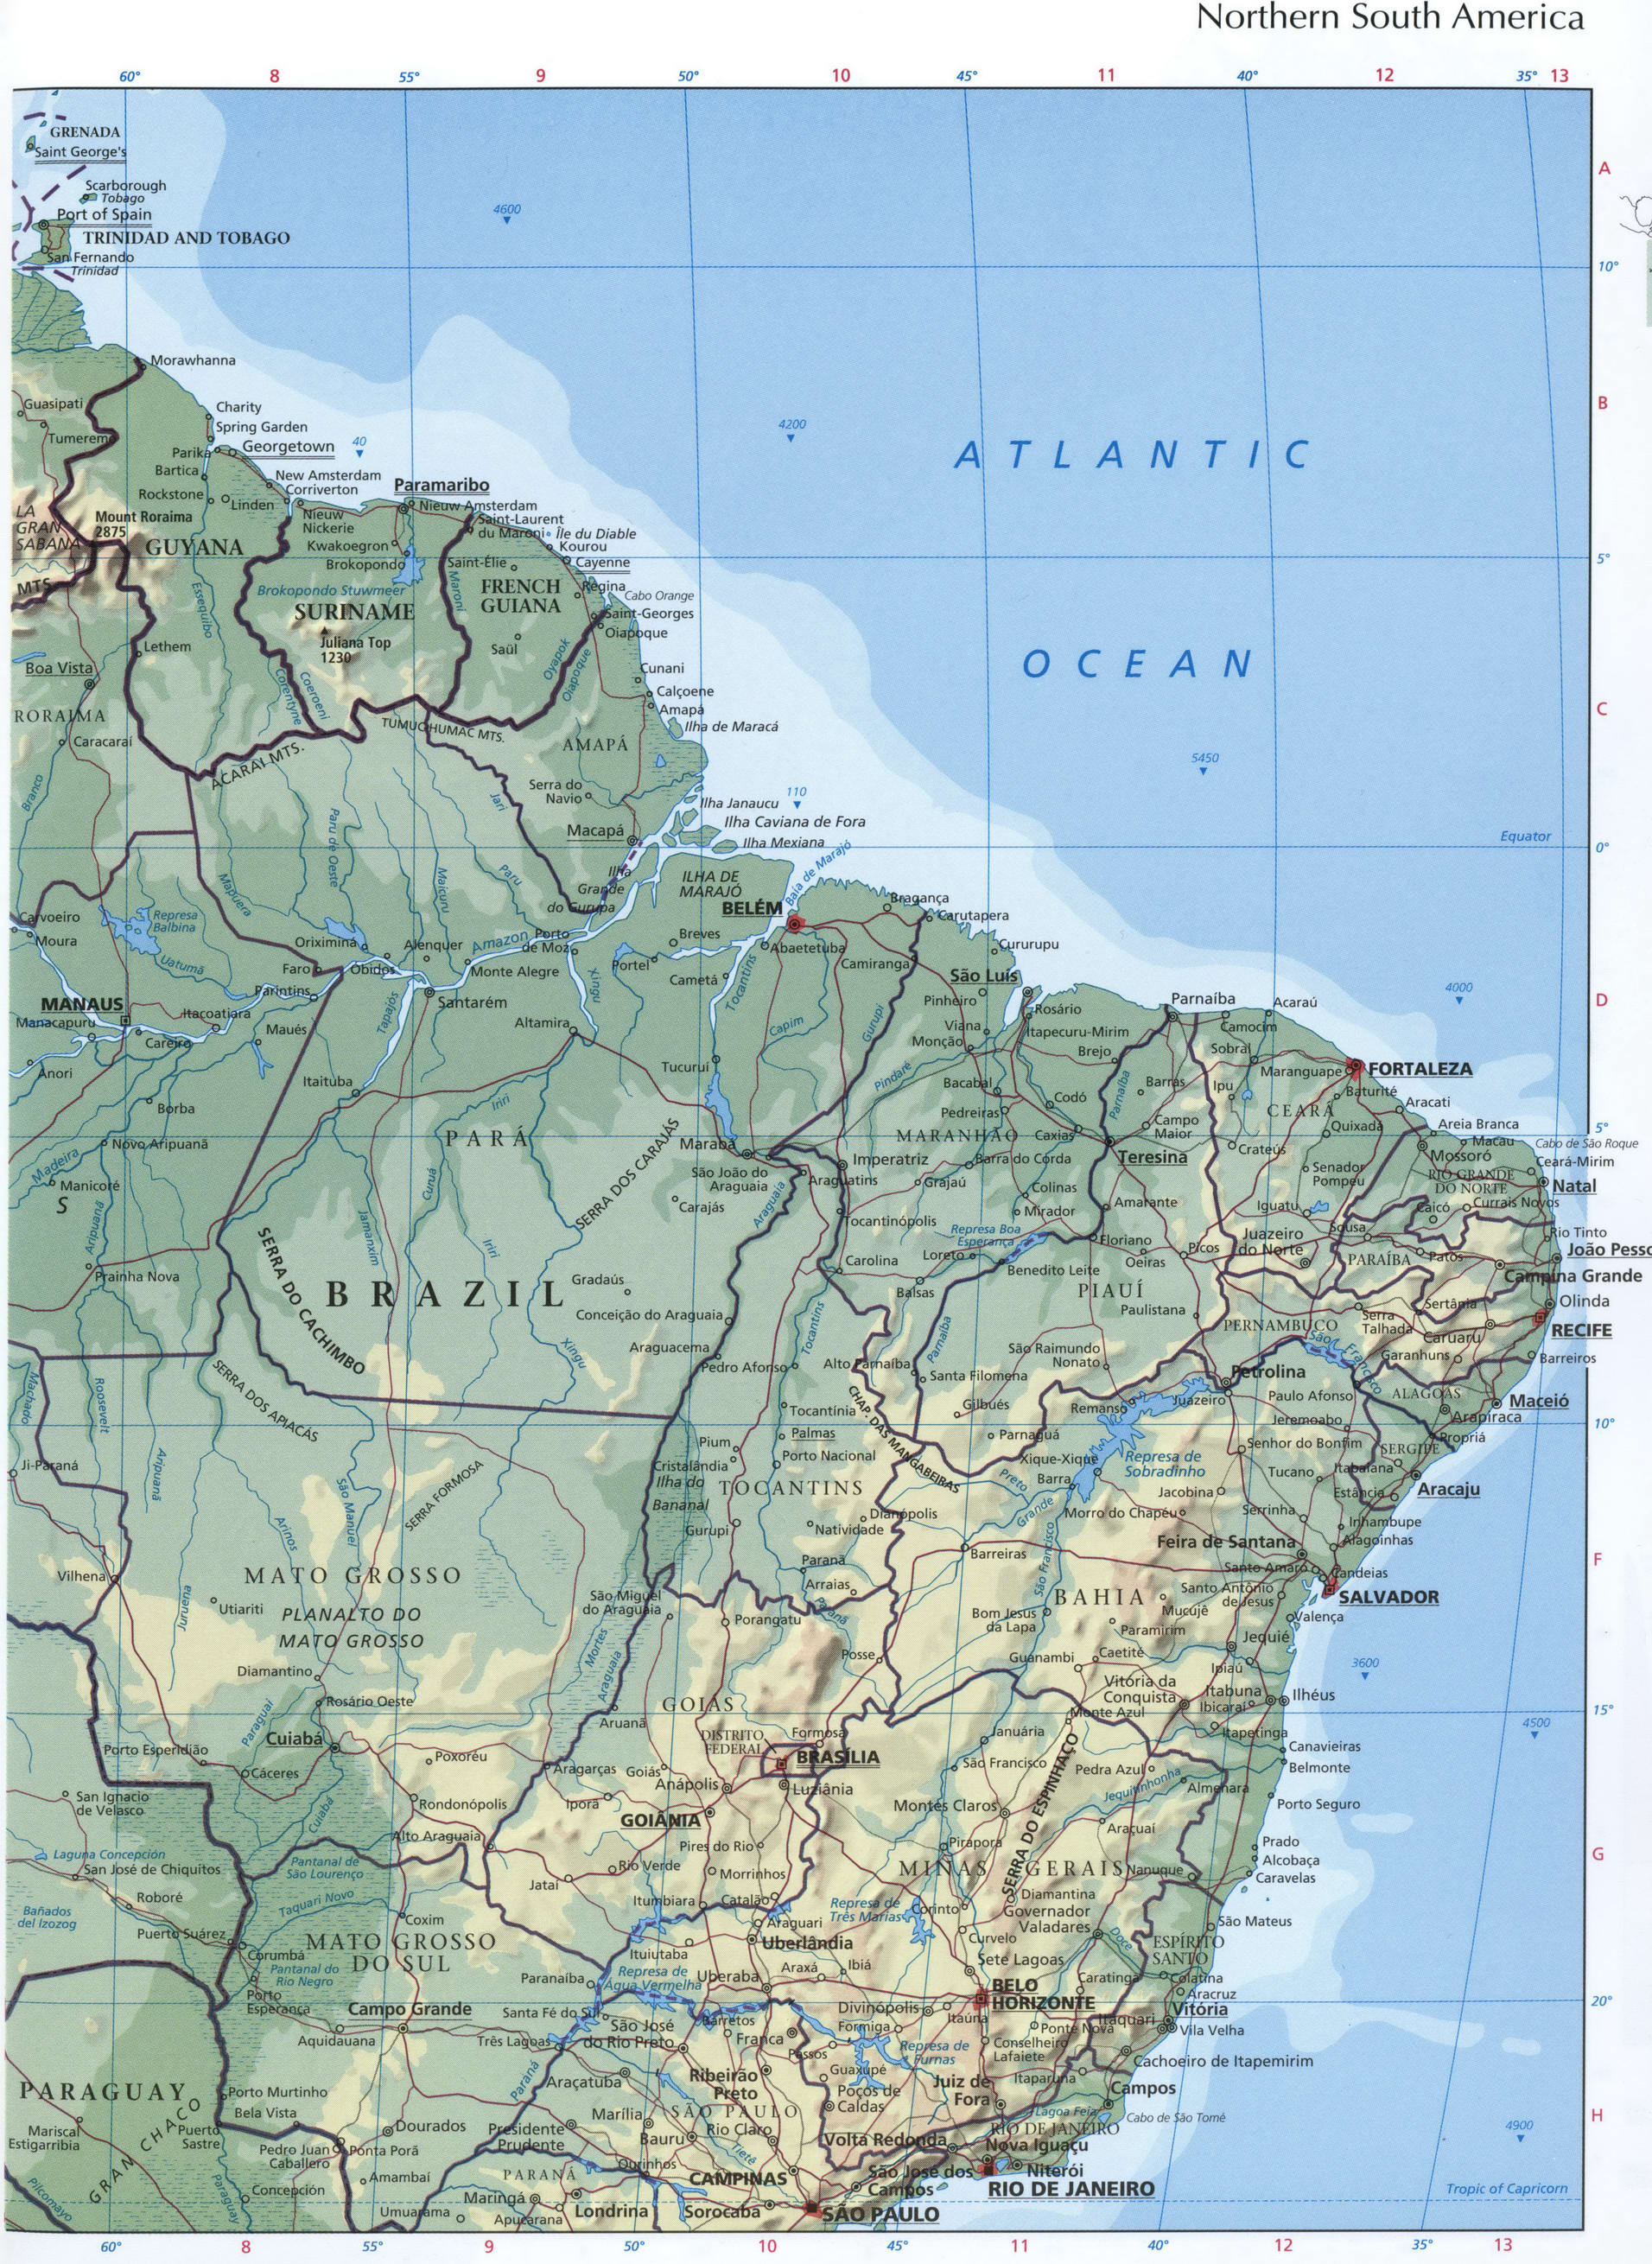 South America map Northern part